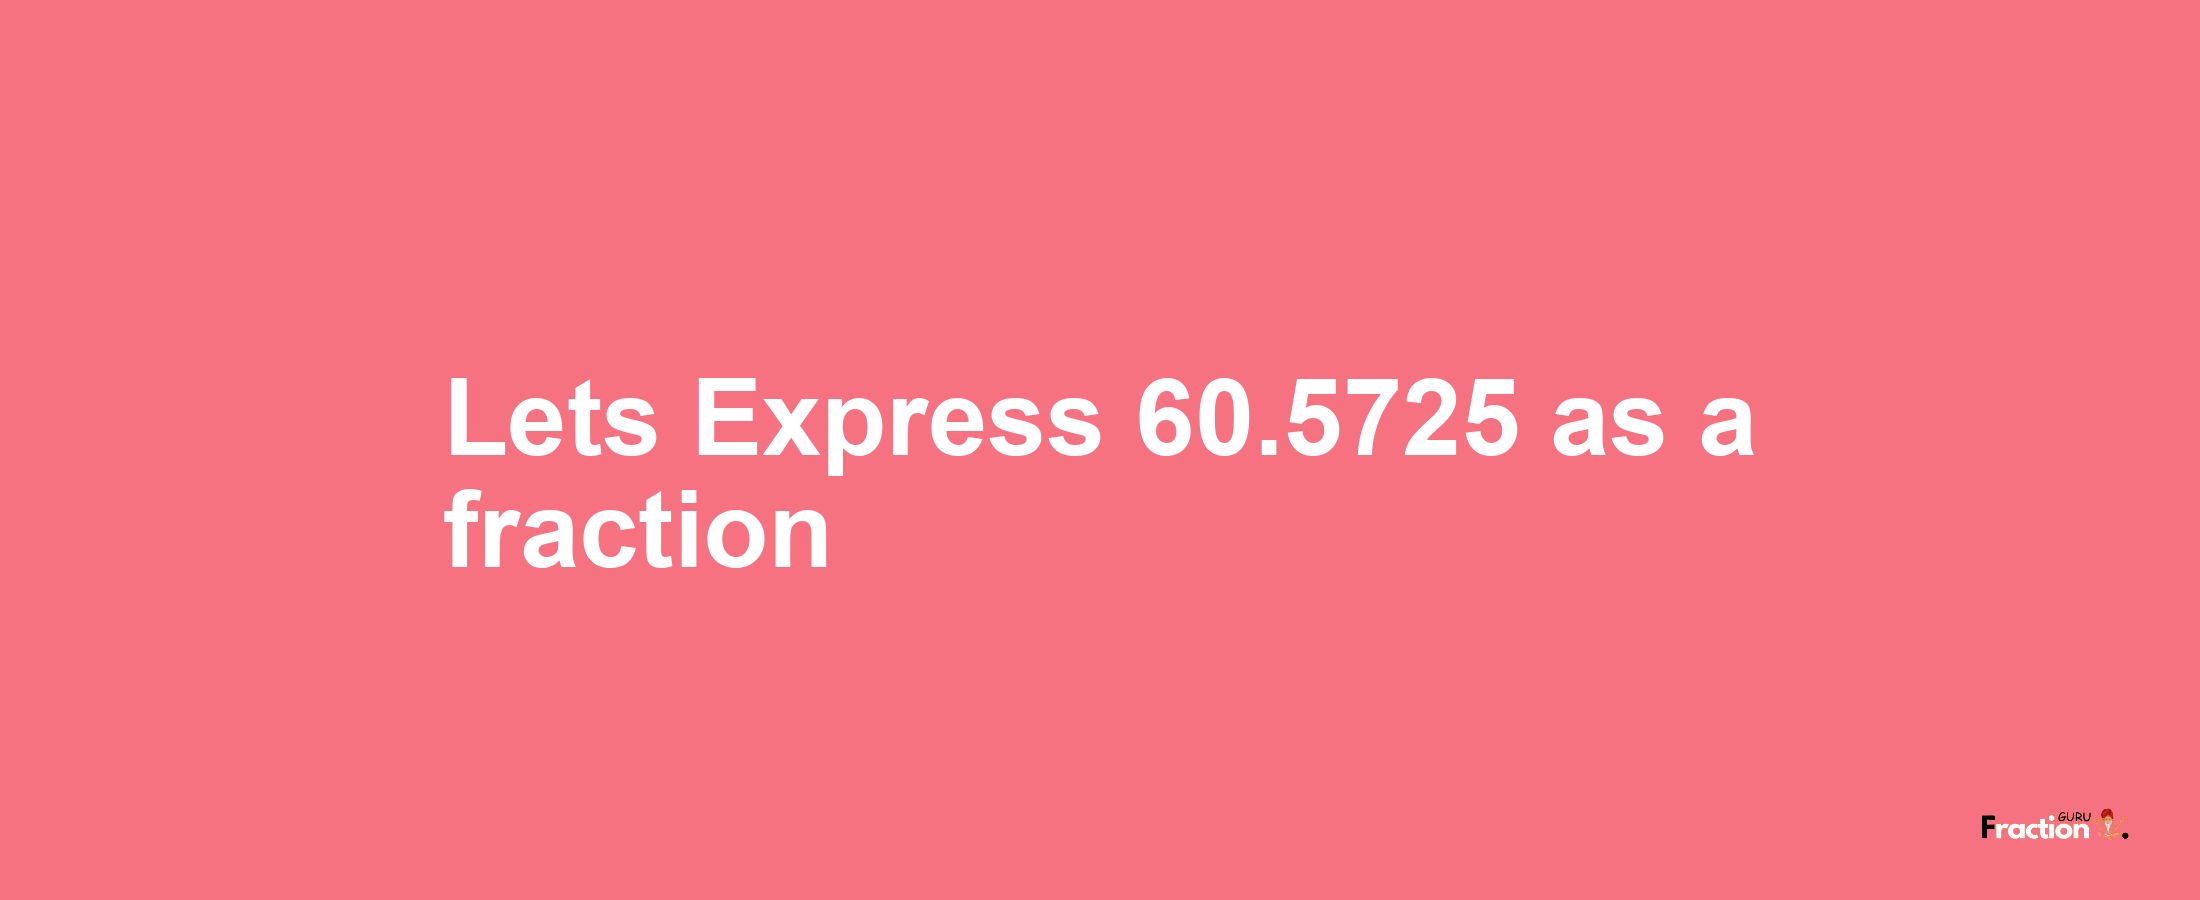 Lets Express 60.5725 as afraction